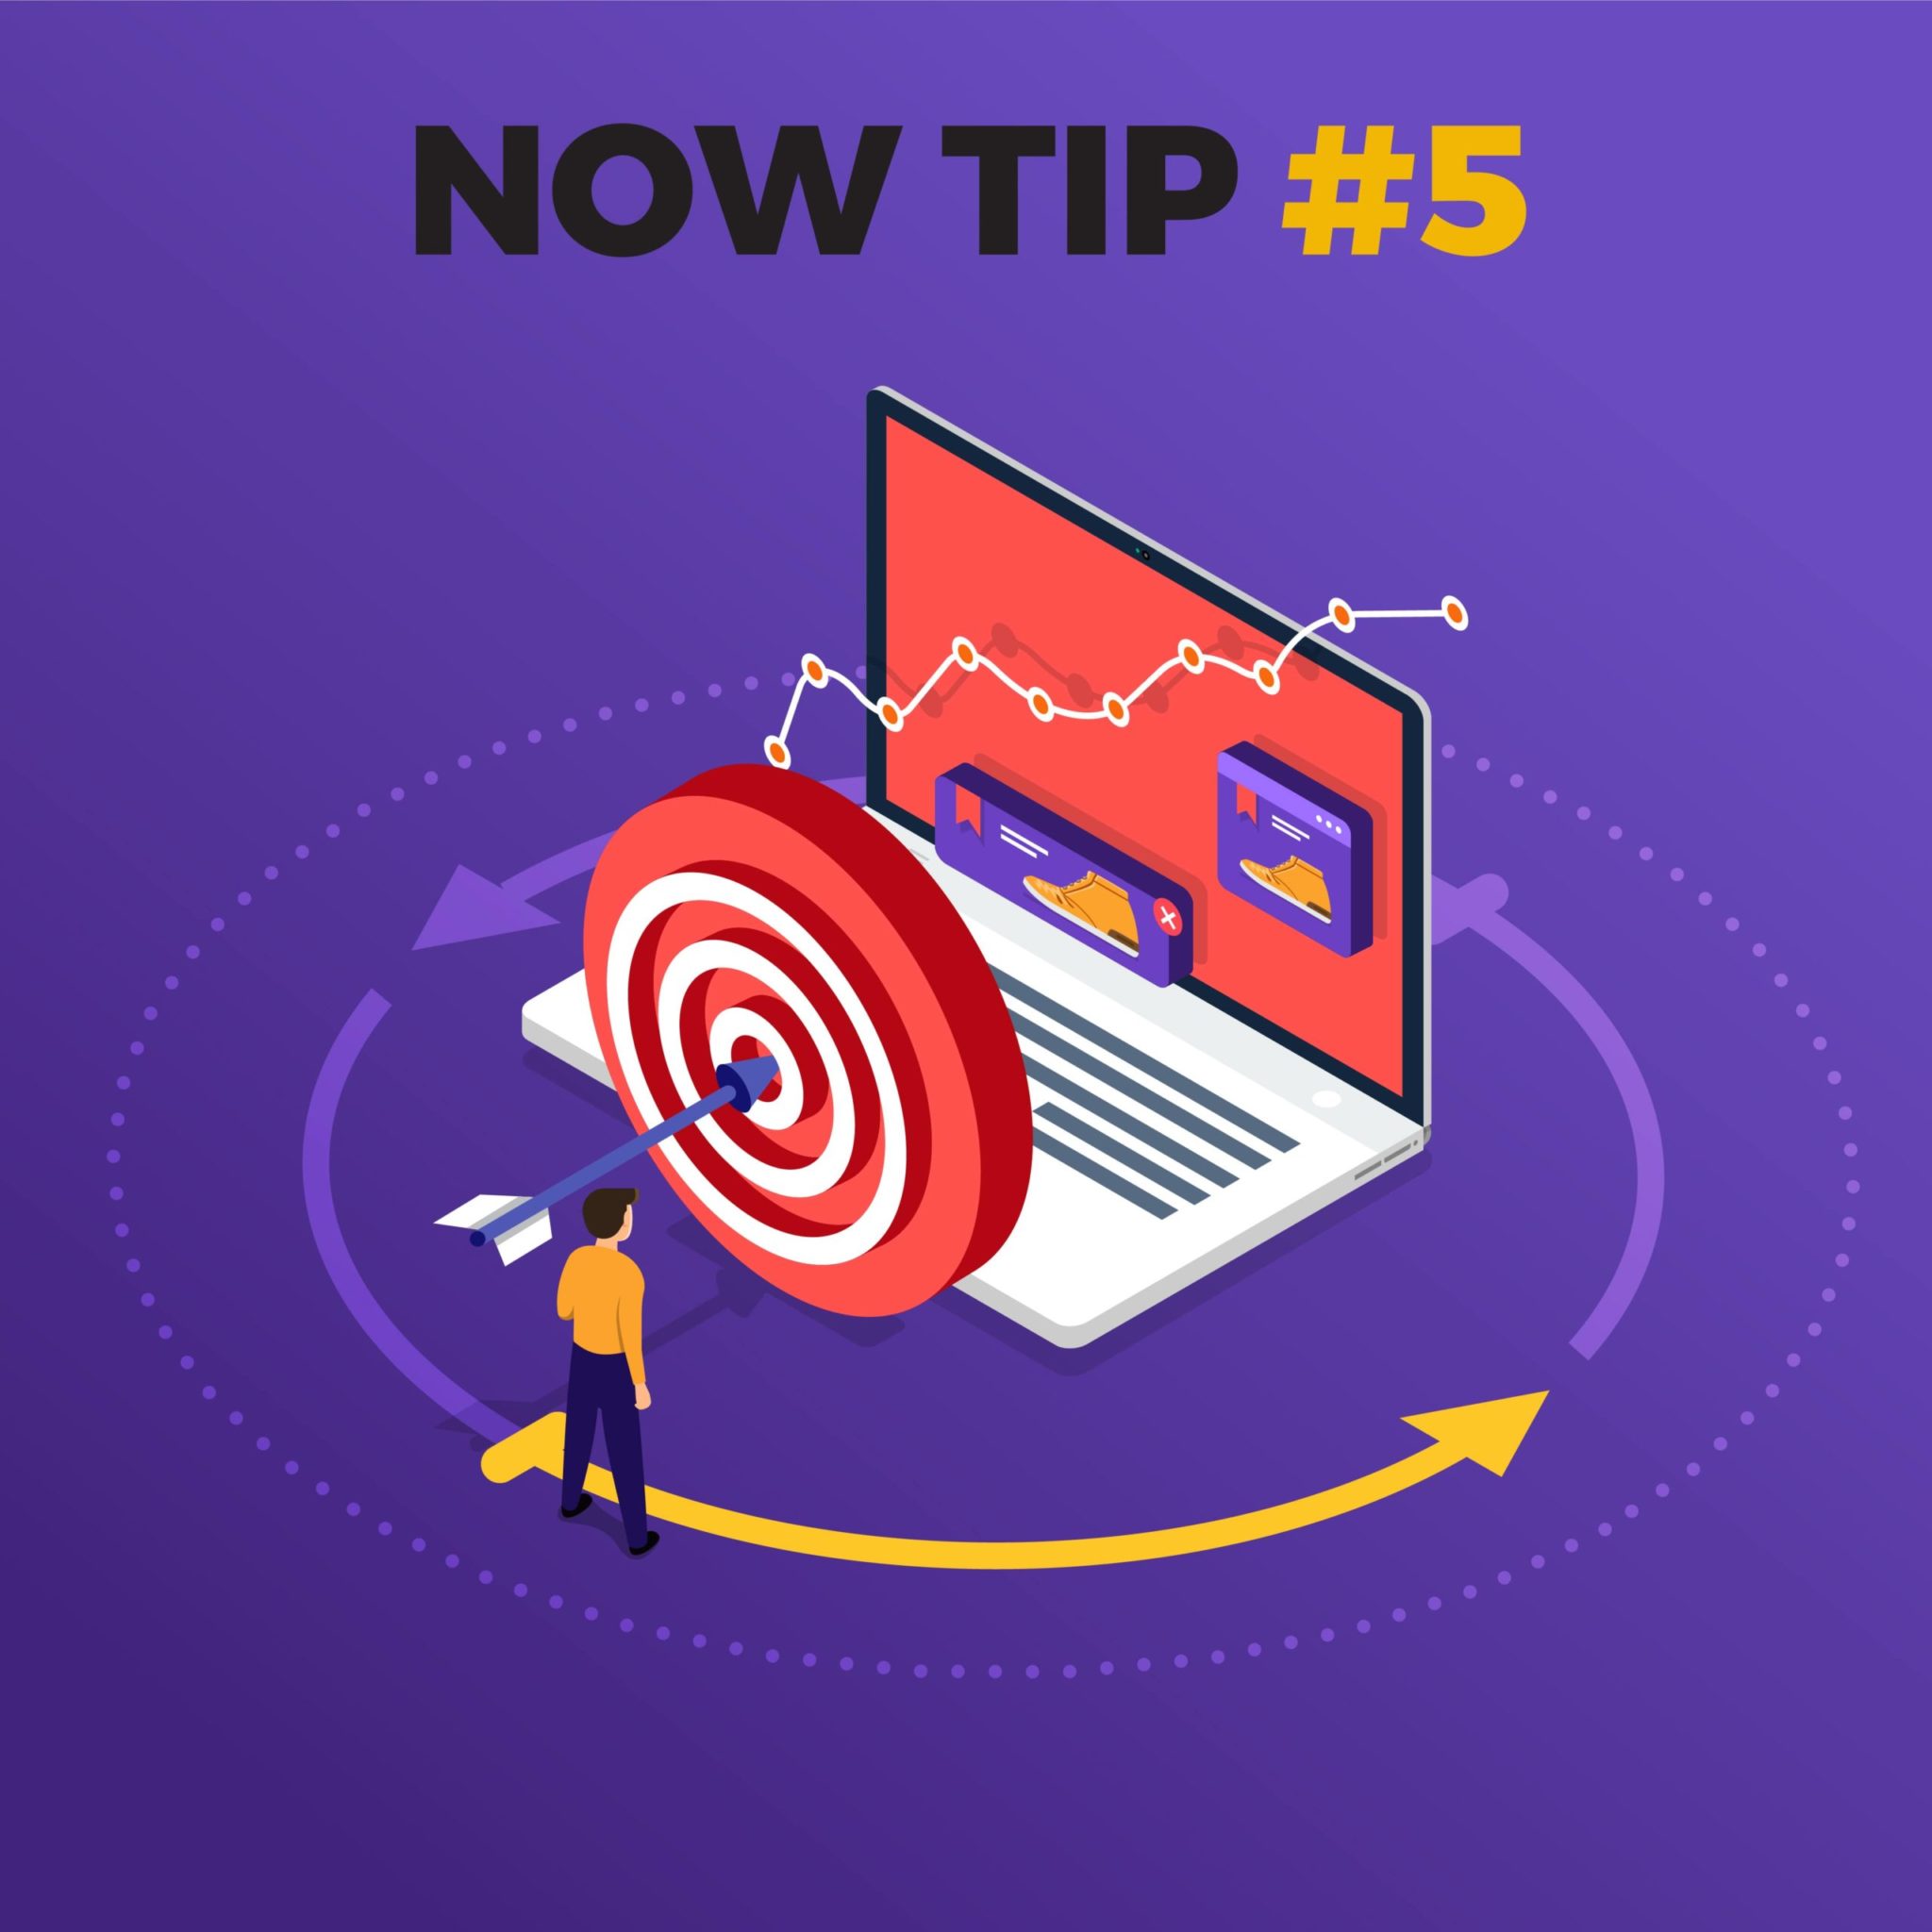 NOW TIP #5